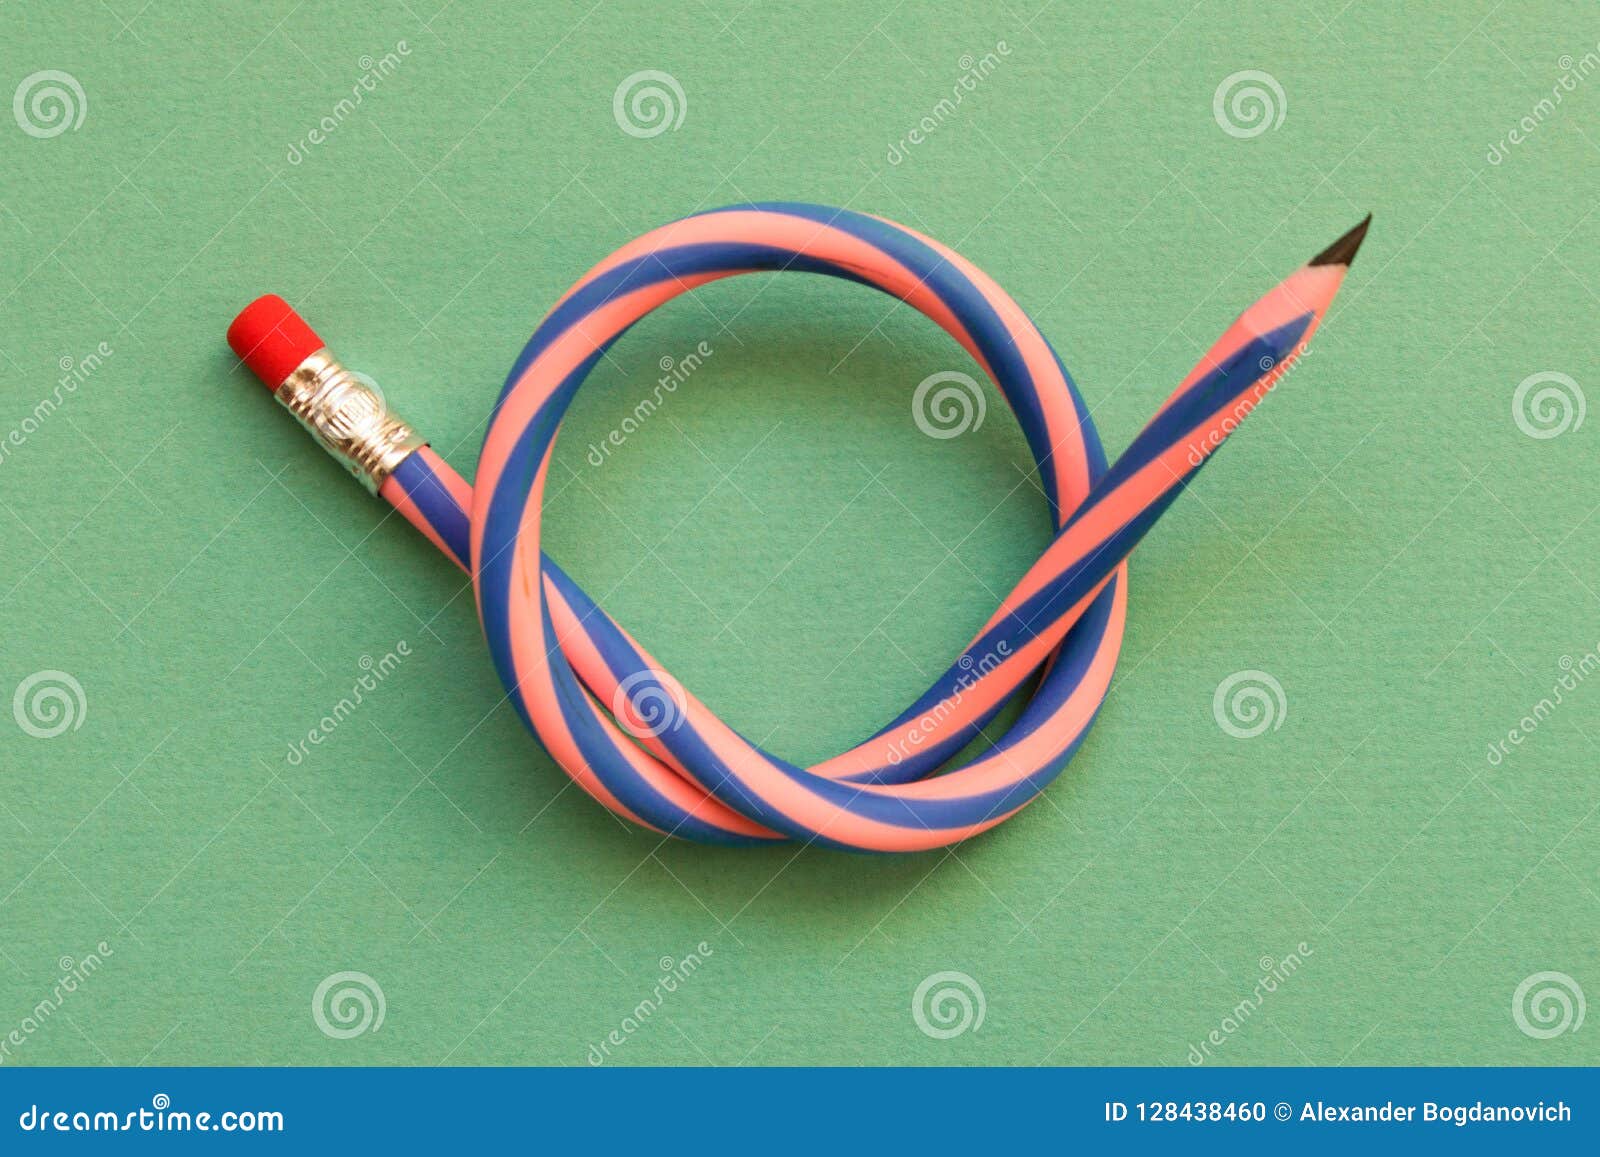 Flexible Pencil . Isolated On Light Background. Bending Pencil Stock ...